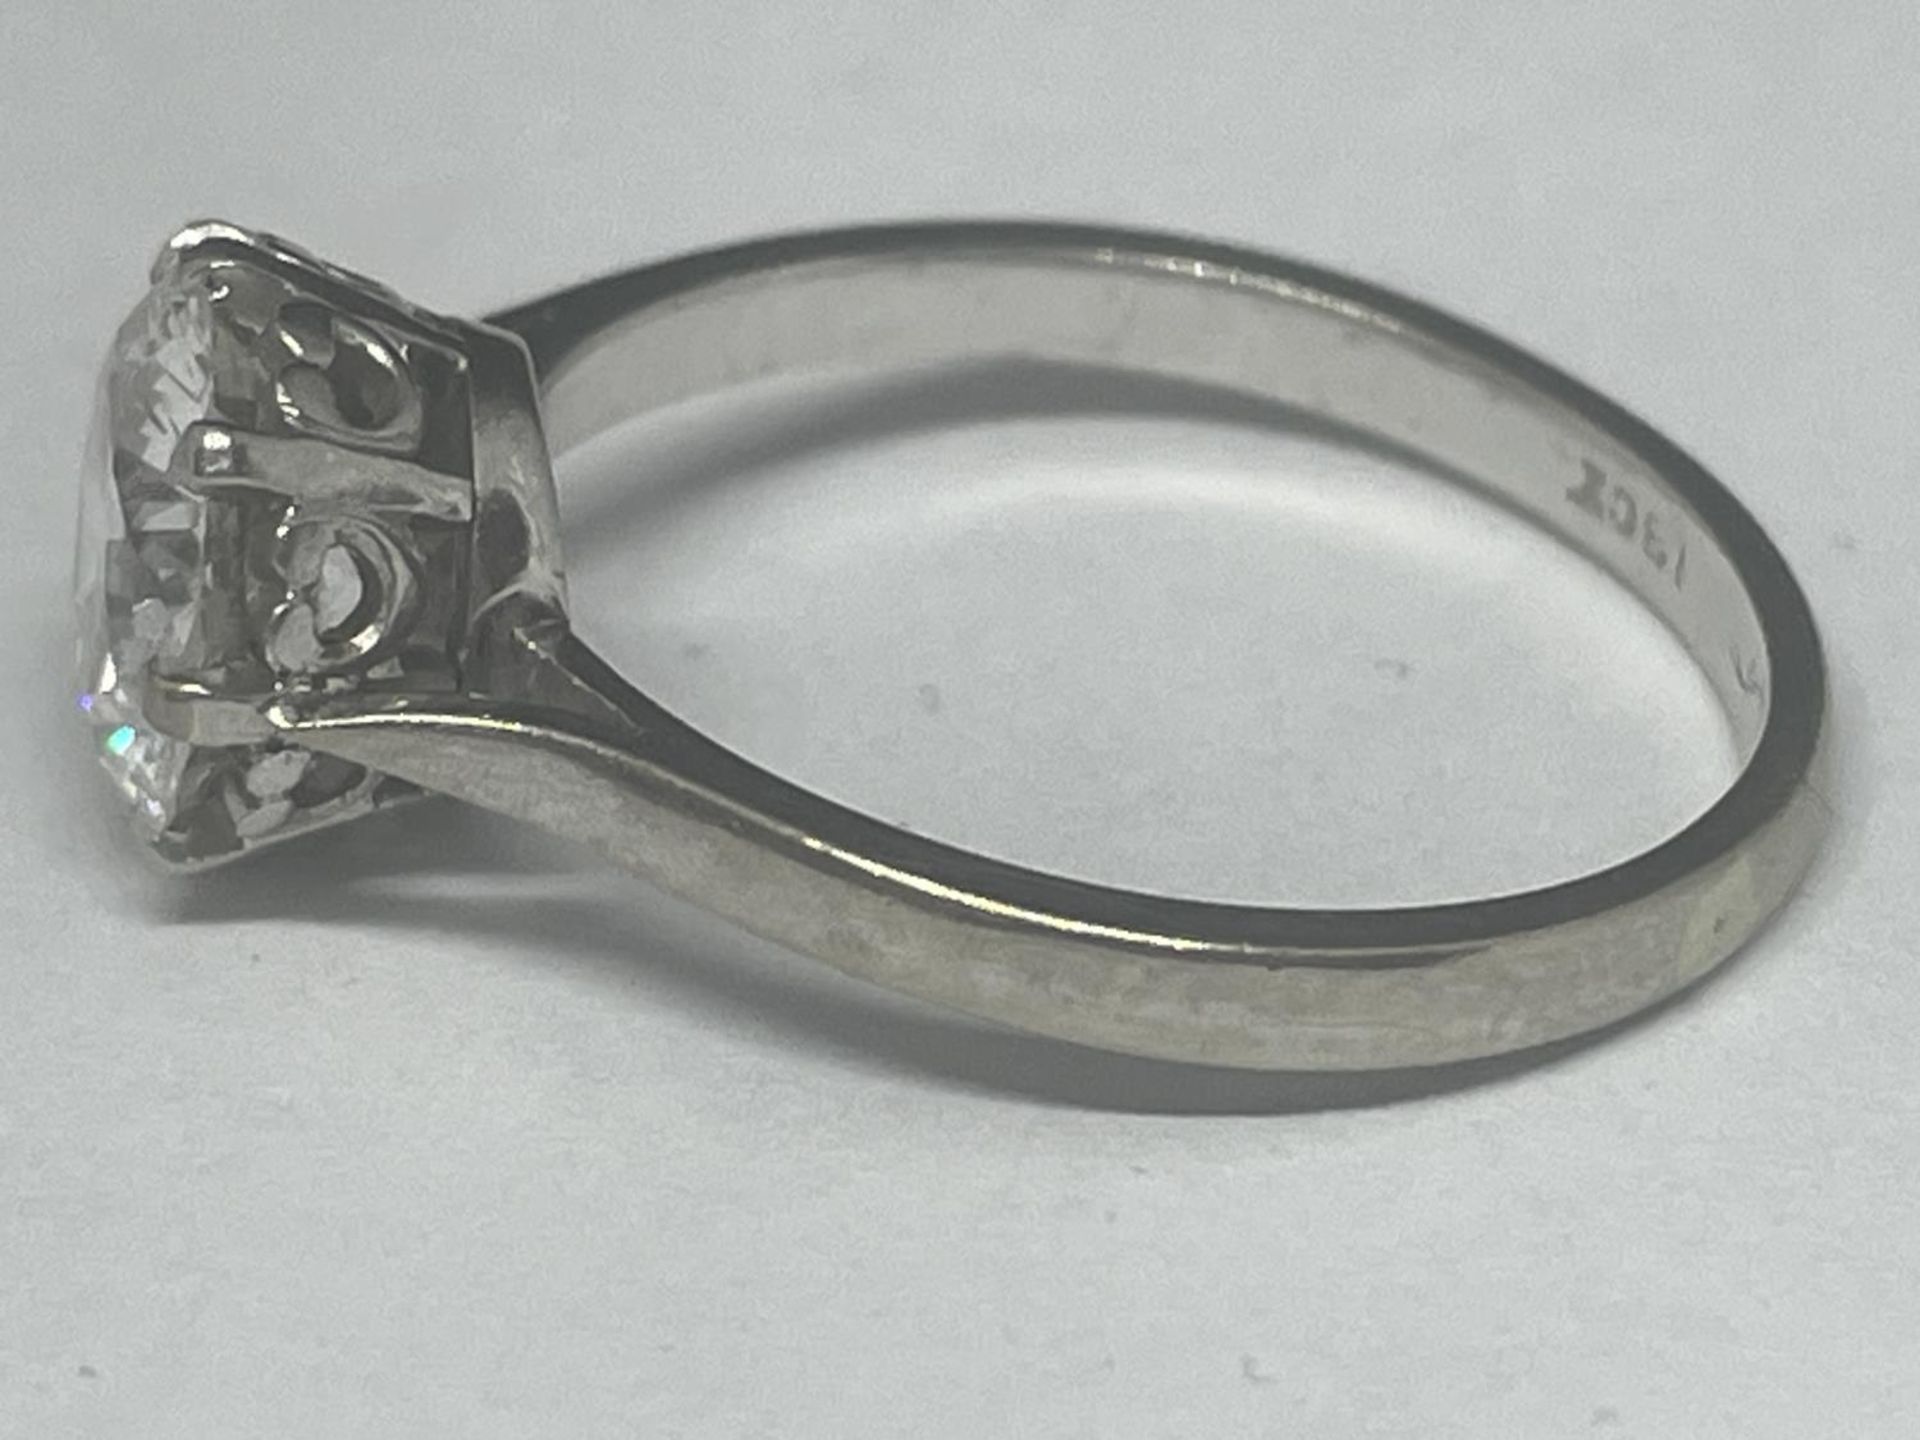 A SINGLE STONE DIAMOND SOLITAIRE RING. APPROXIMATELY 2.5 CARAT MOUNTED ON 18 CARAT WHITE GOLD. - Image 2 of 4